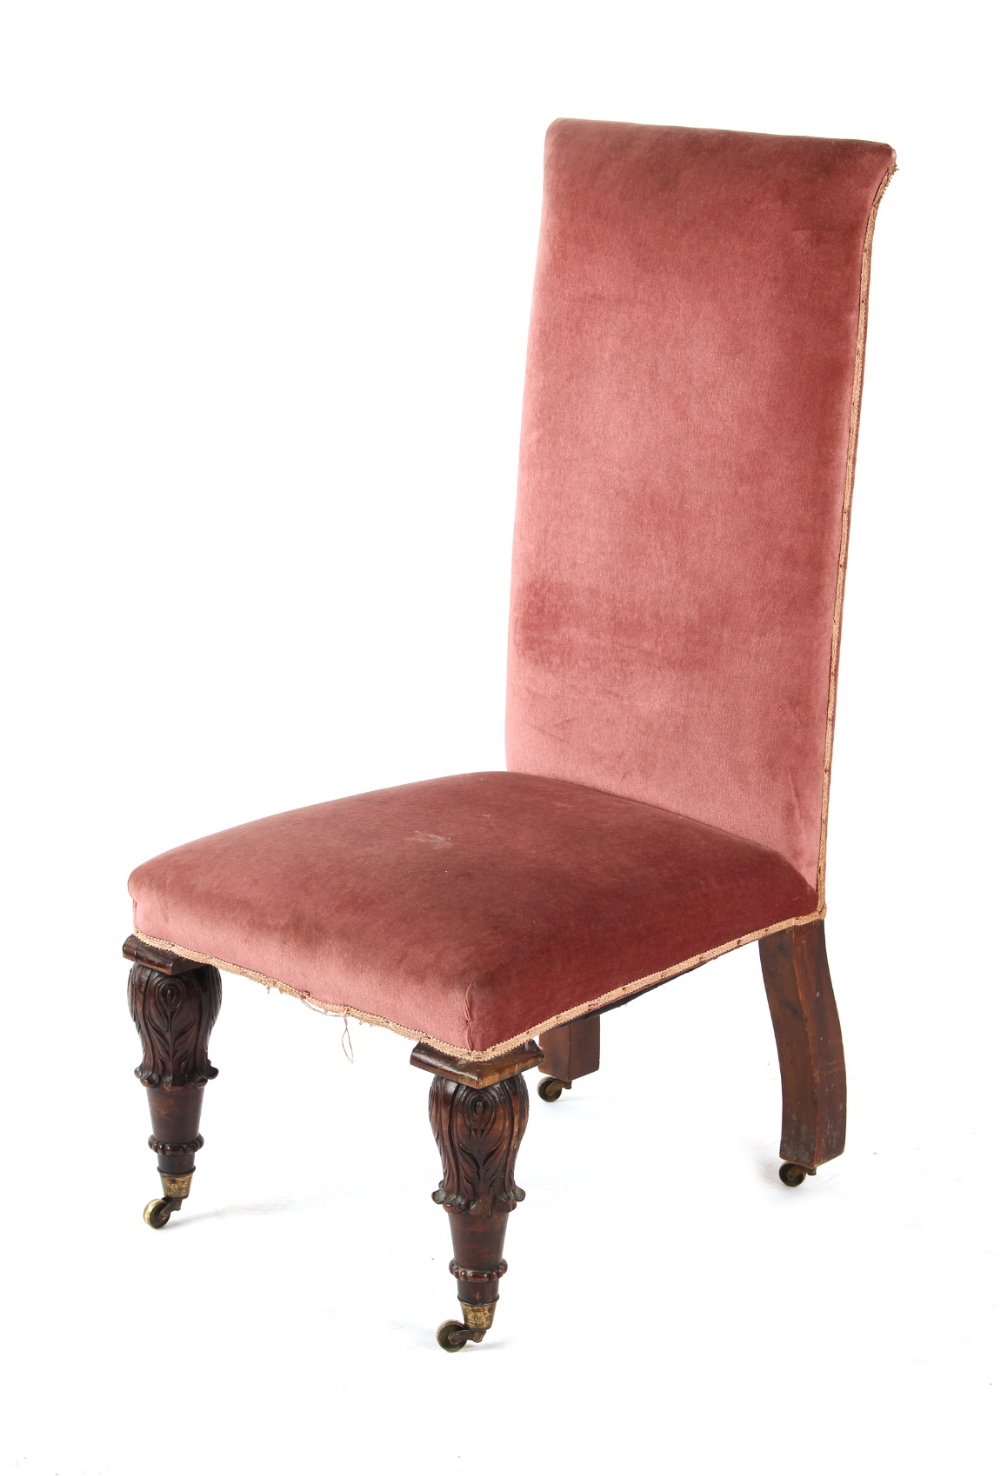 Property of a lady - an early 19th century William IV faux rosewood nursing chair, with pink